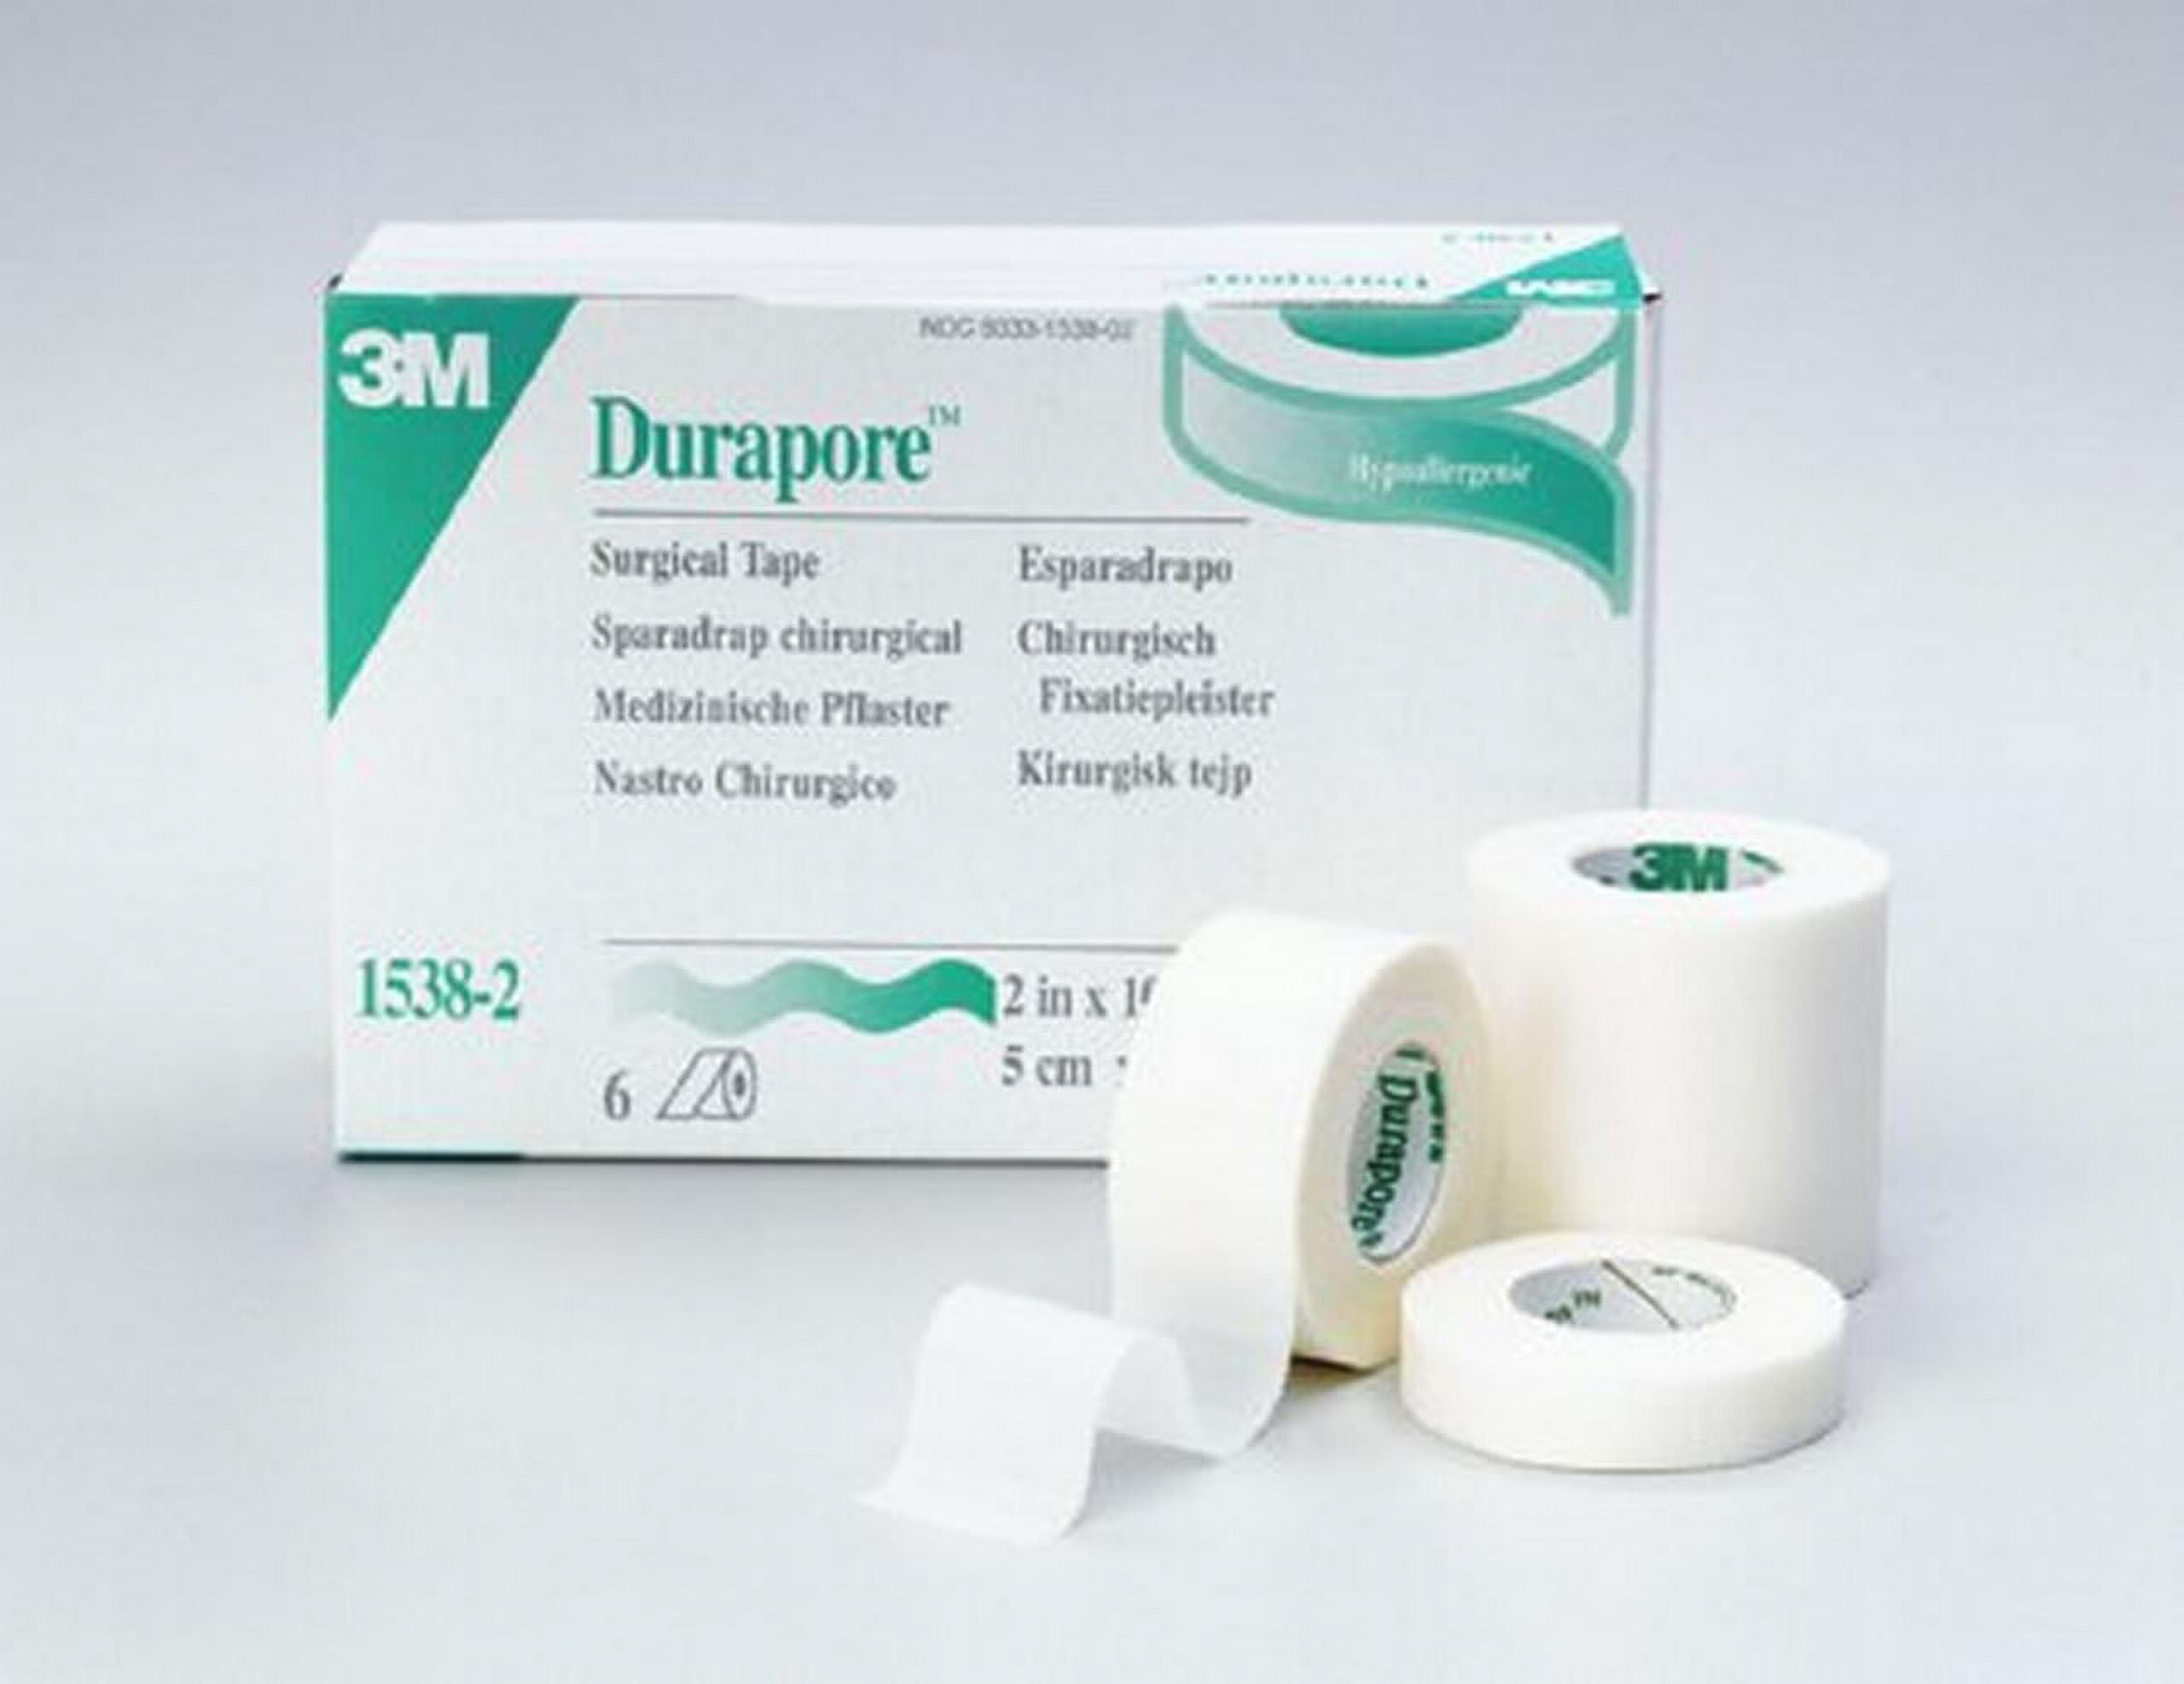 3M Durapore Surgical Tape 1 x 10 Yd 1538-1, 1 Box, 12 Rolls/Box, 1 Inch X  10 Yard - Fry's Food Stores